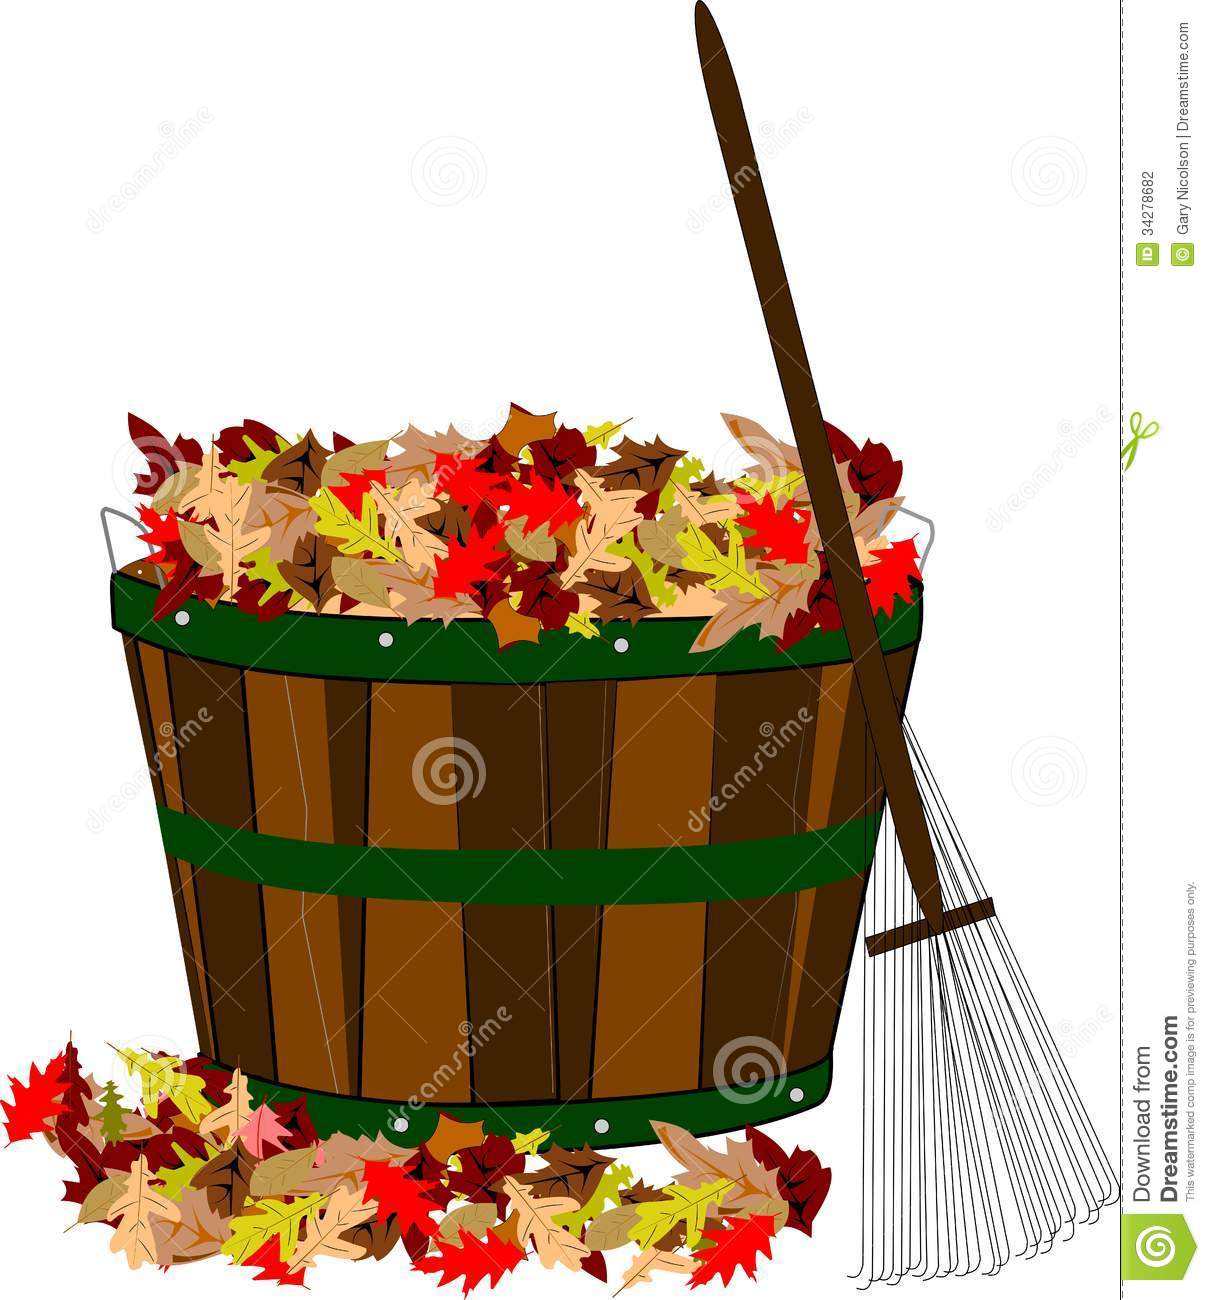 Pile Of Leaves In Wooden Basket With Wire Rake